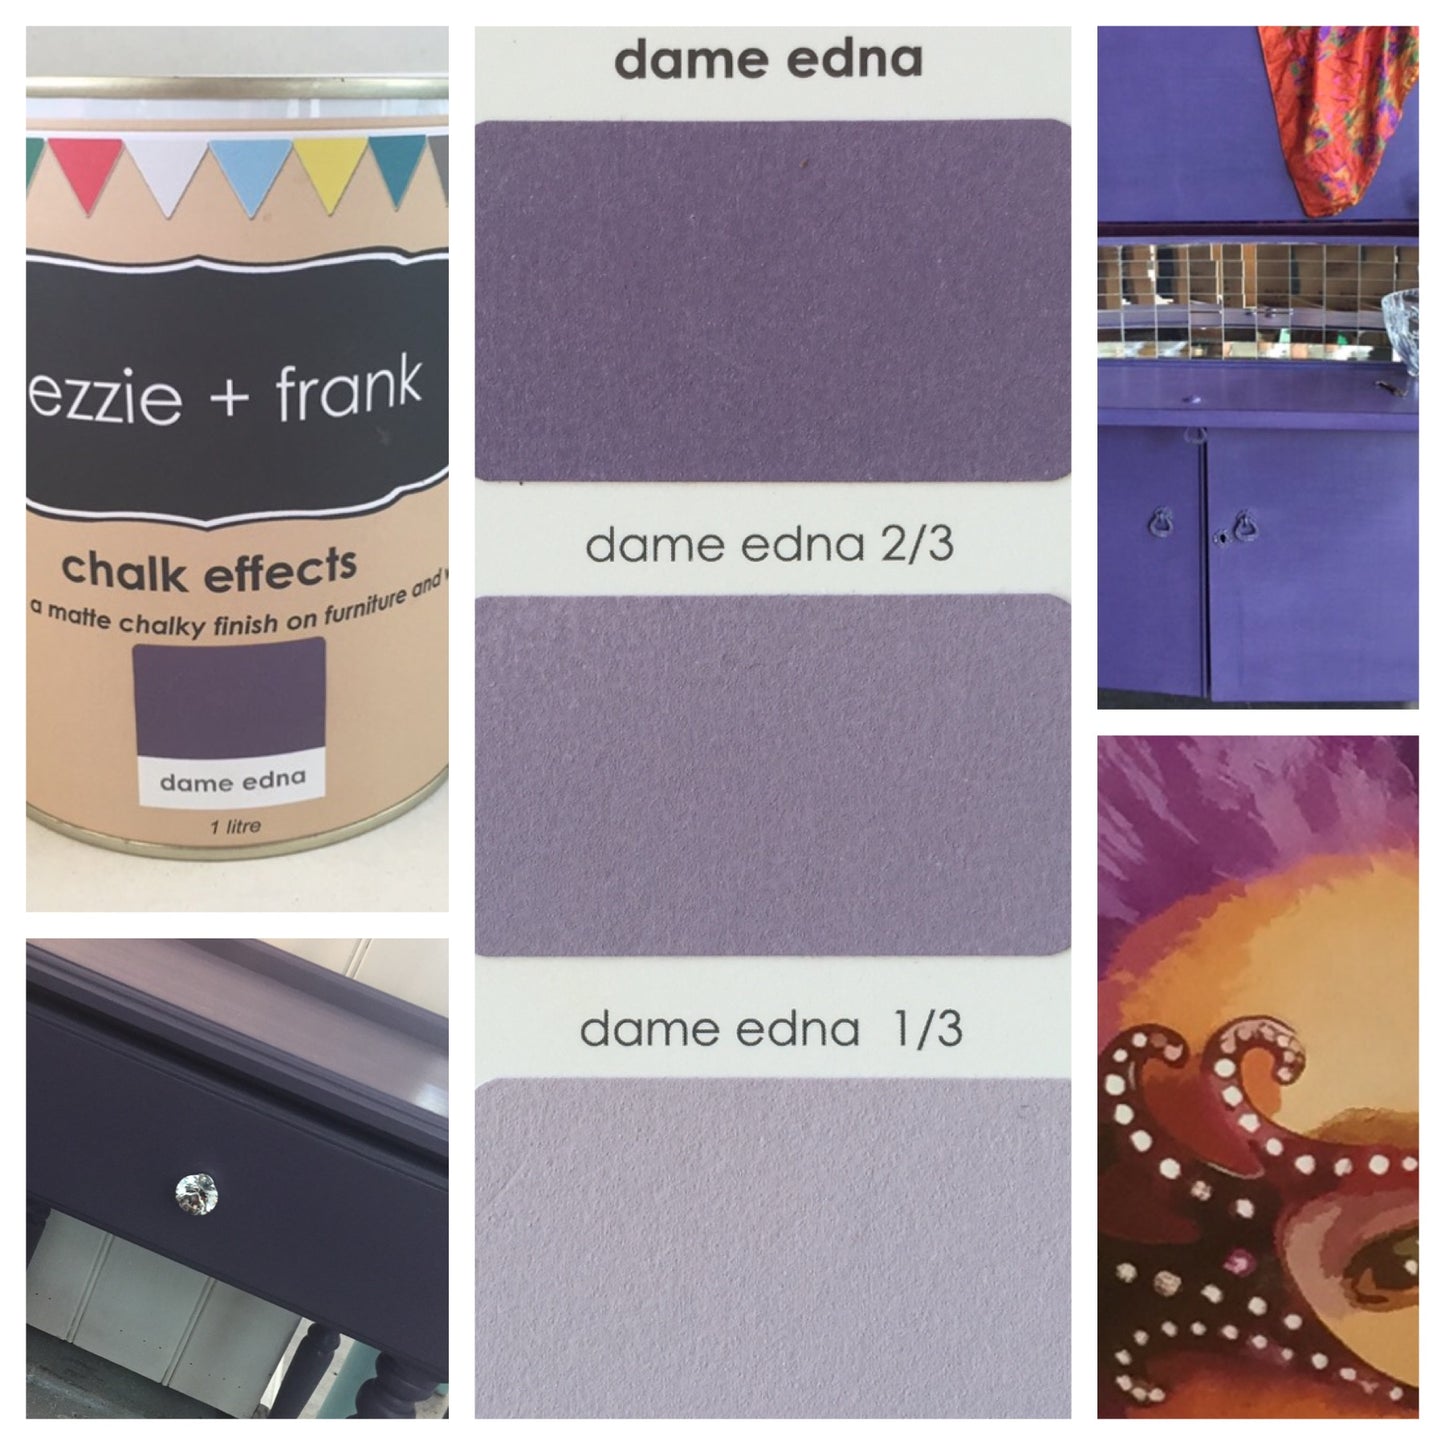 Load image into Gallery viewer, Chalk Effects Dame Edna - Mezzie + Frank
